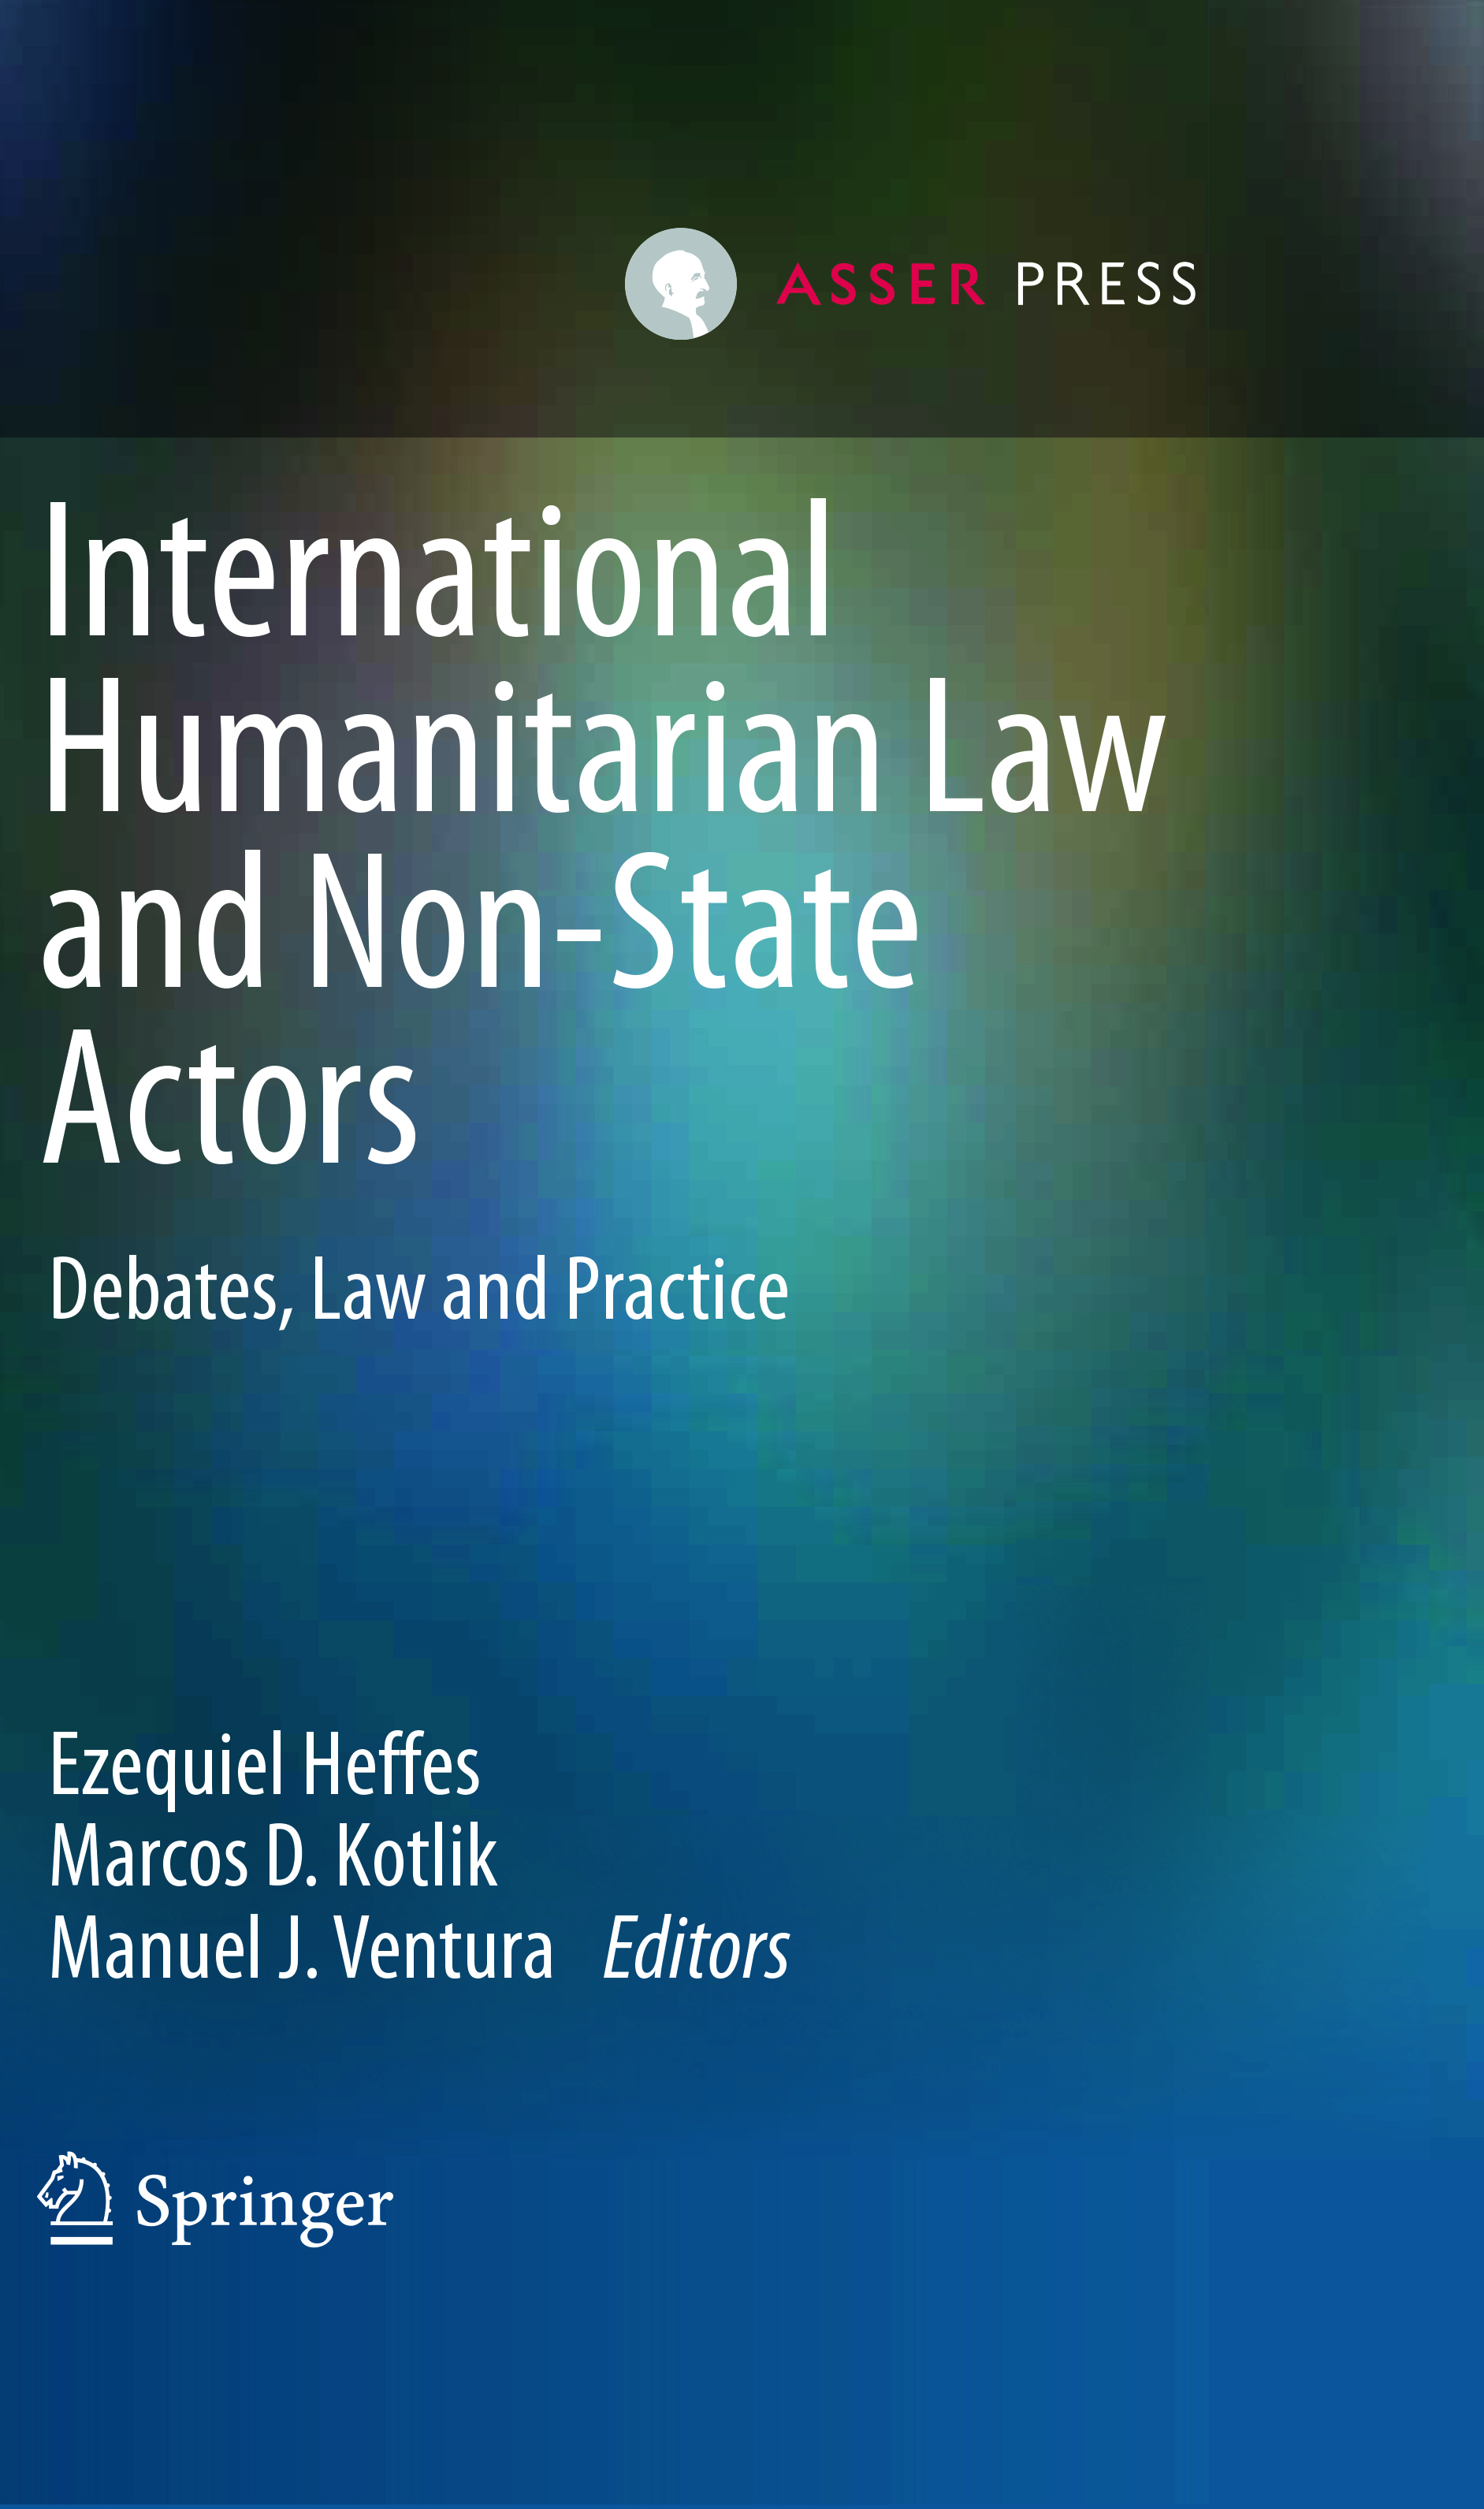 International Humanitarian Law and Non-State Actors - Debates, Law and Practice